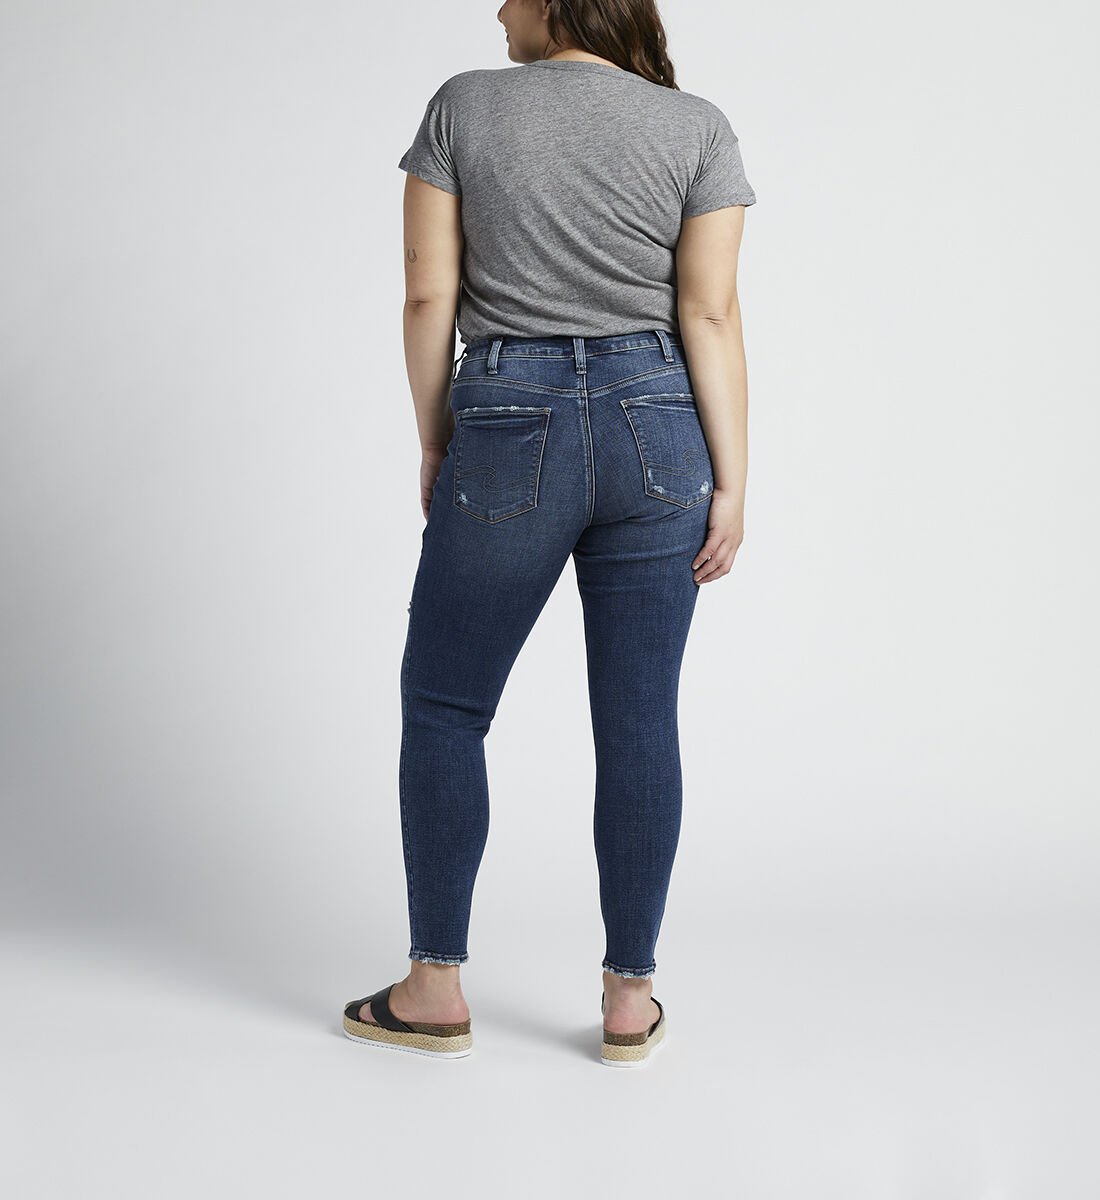 Avery High Rise Skinny Jeans Plus Size Back